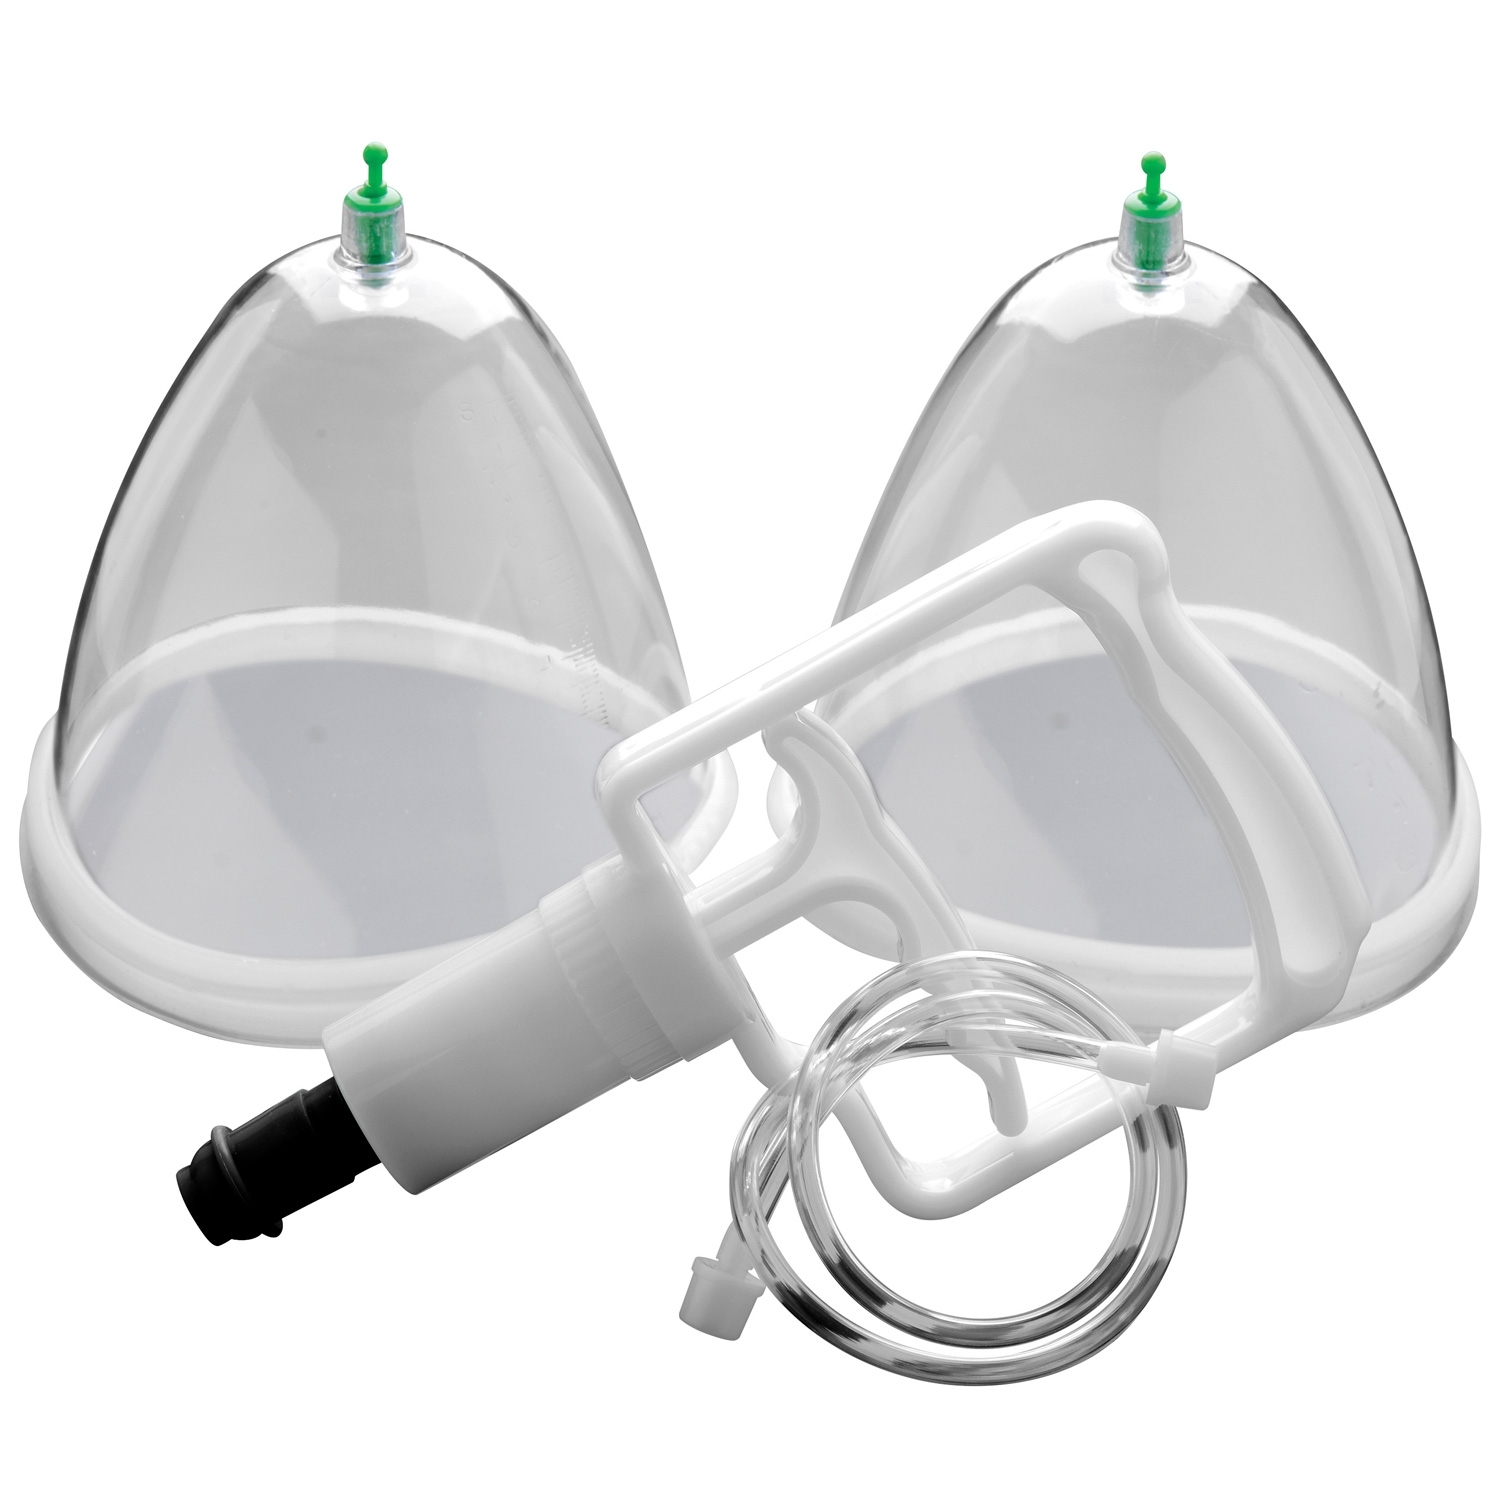 Size Matters Breast Cupping System - Klar